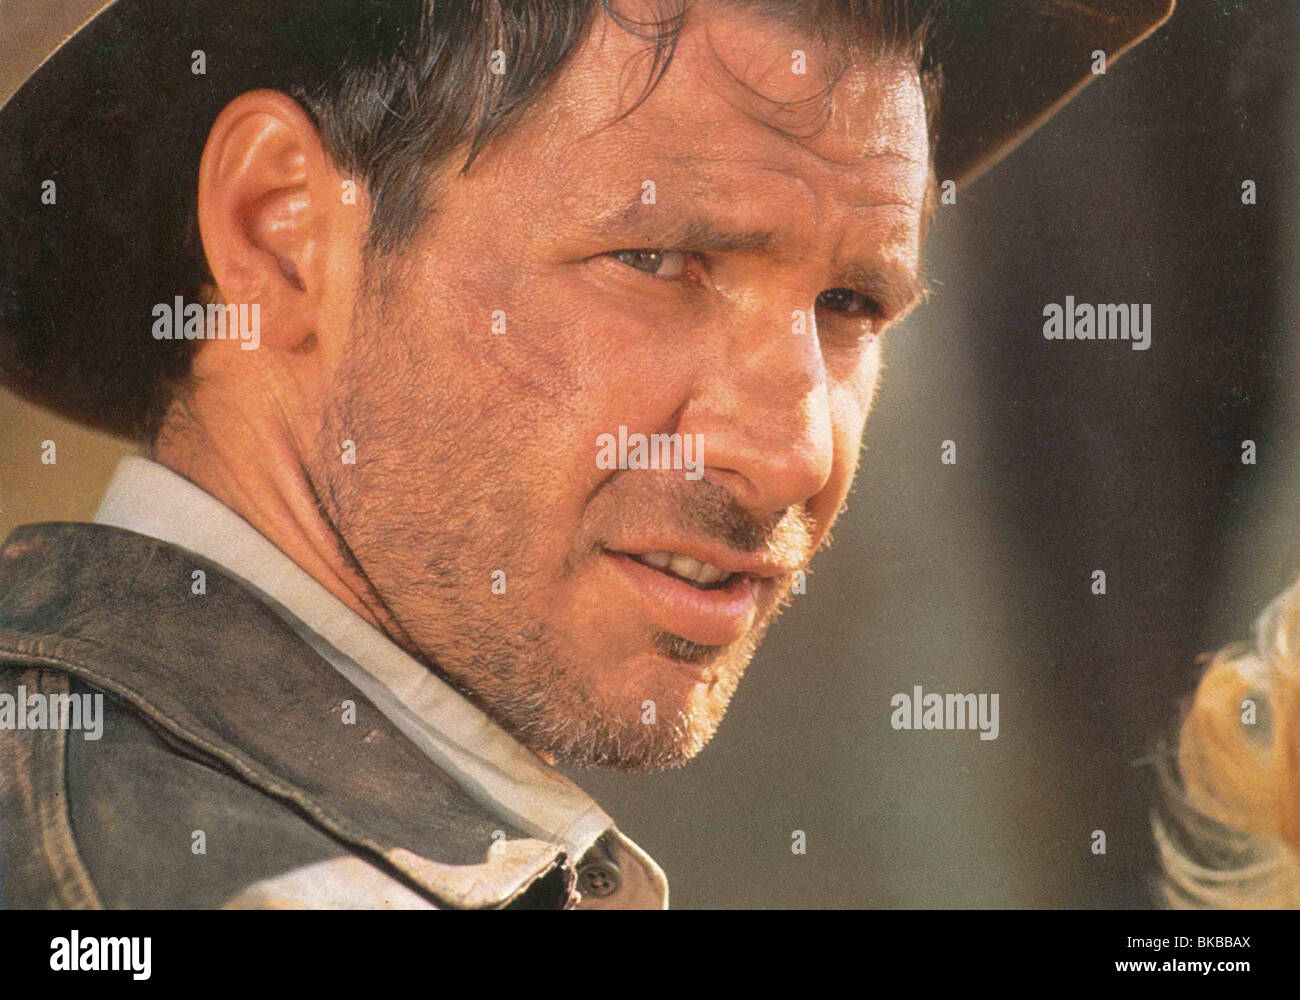 INDIANA JONES AND THE TEMPLE OF DOOM (1984) HARRISON FORD INT 001FOH Stock Photo